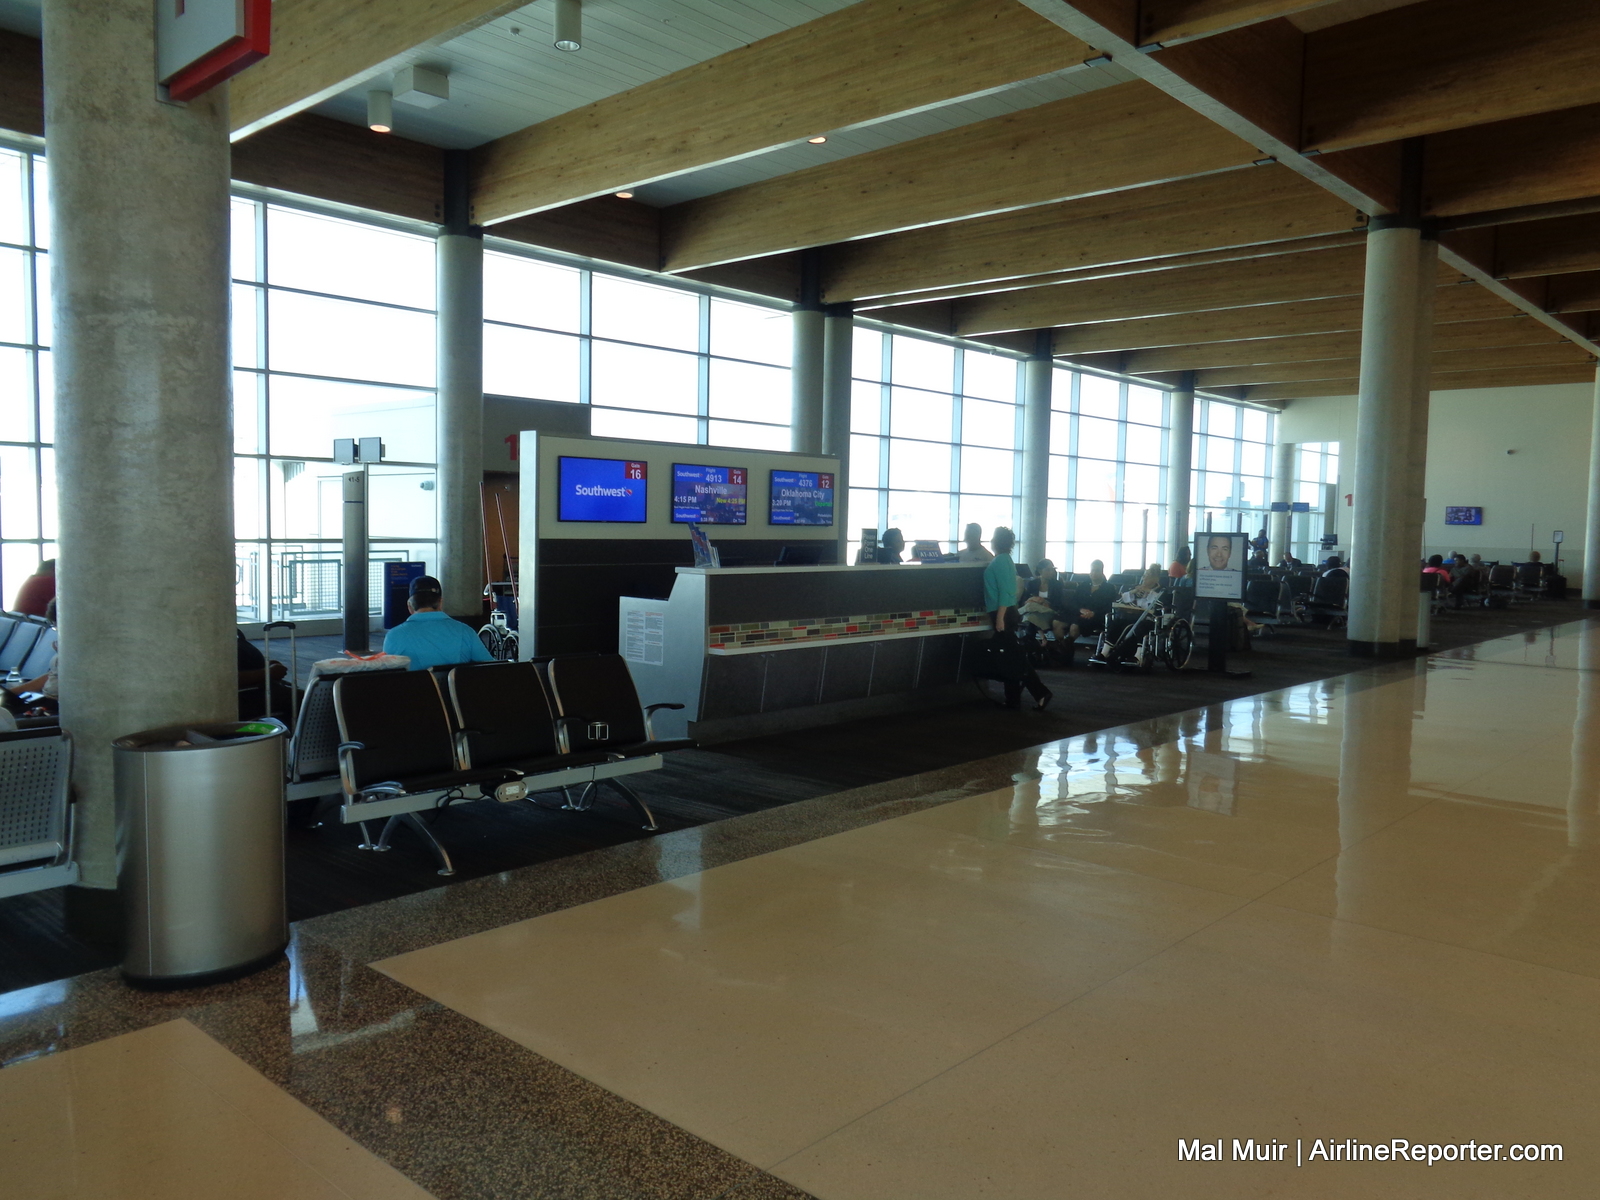 Dallas Love Field Completes Refurbishment Ahead of Wright Amendment Changes - AirlineReporter ...